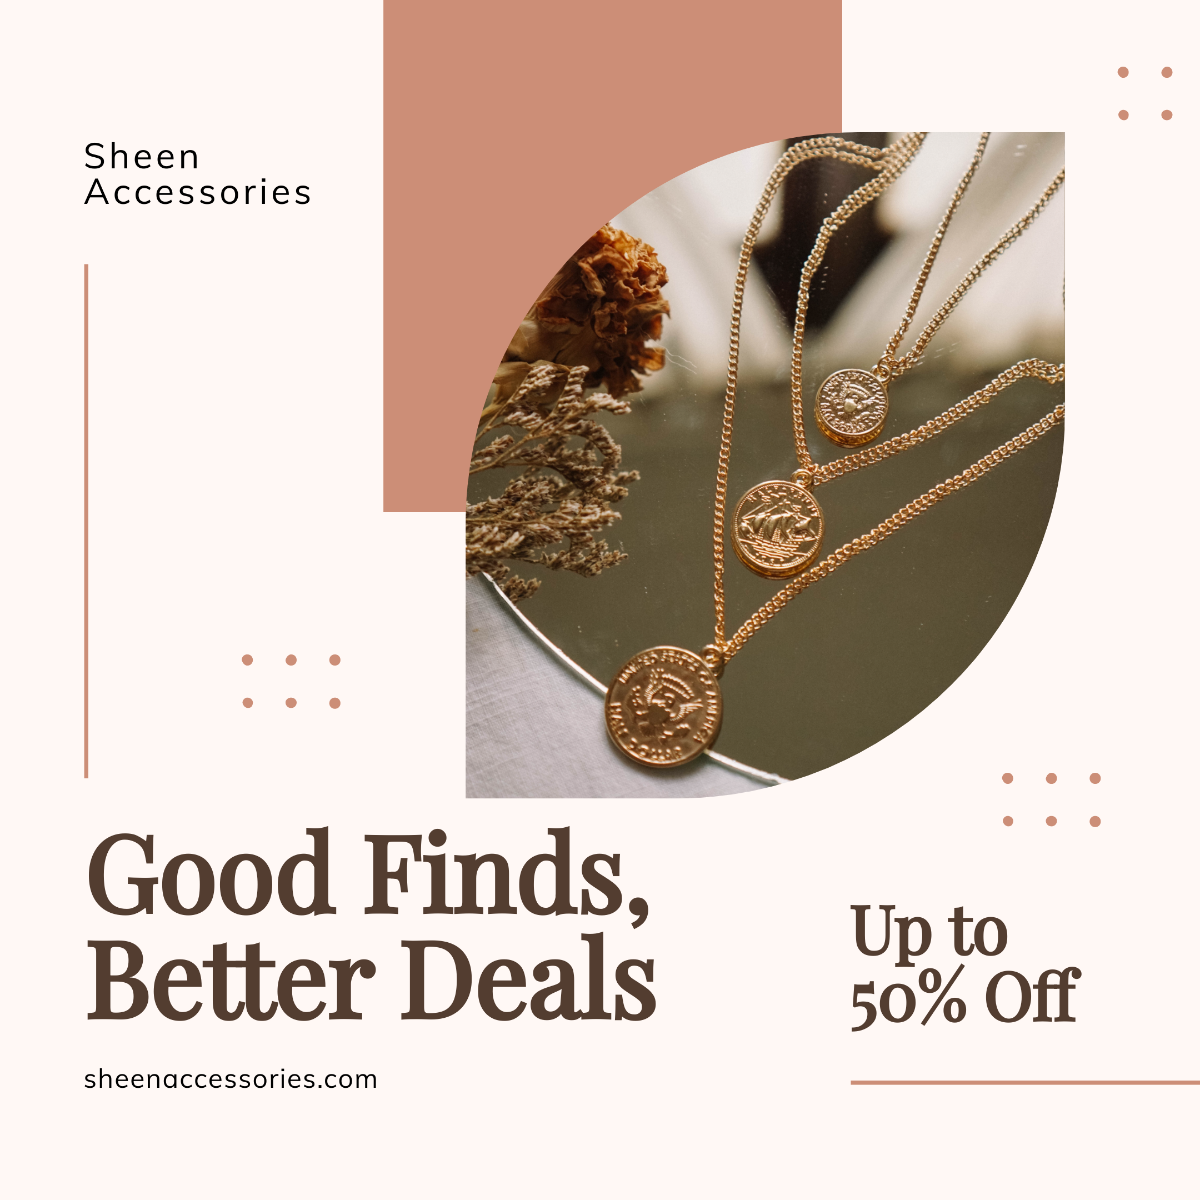 Accessories Instagram Feed Ad